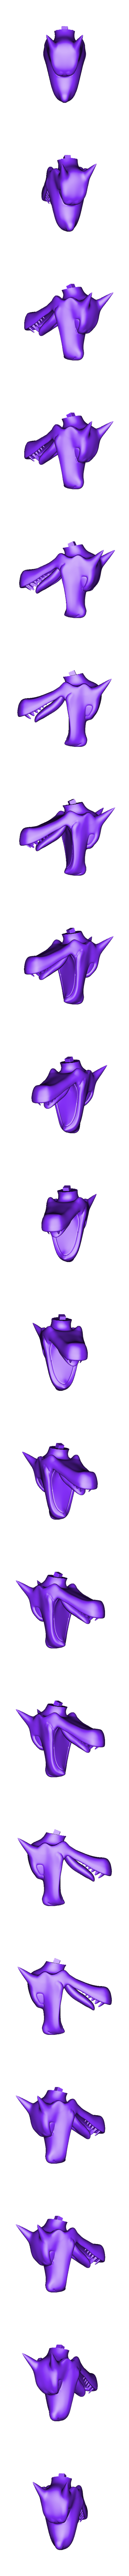 head.obj Download OBJ file Aerodactyl(with cuts and as a whole) • 3D printer template, erickantunesxd123